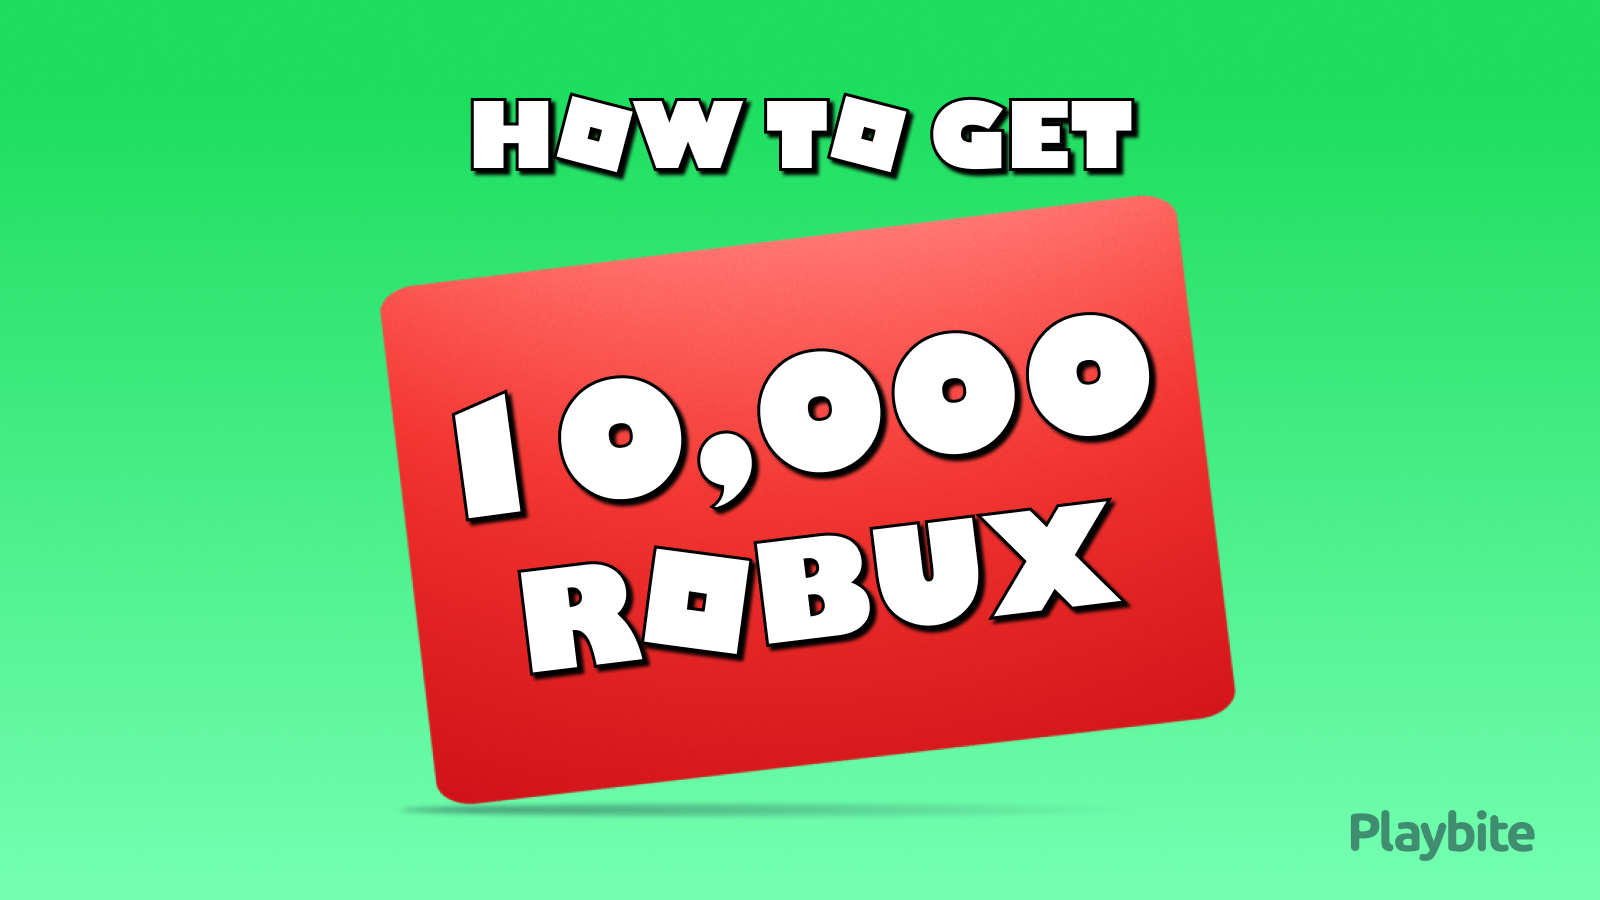 Roblox Digital Gift Code for 10,000 Robux [Redeem Worldwide